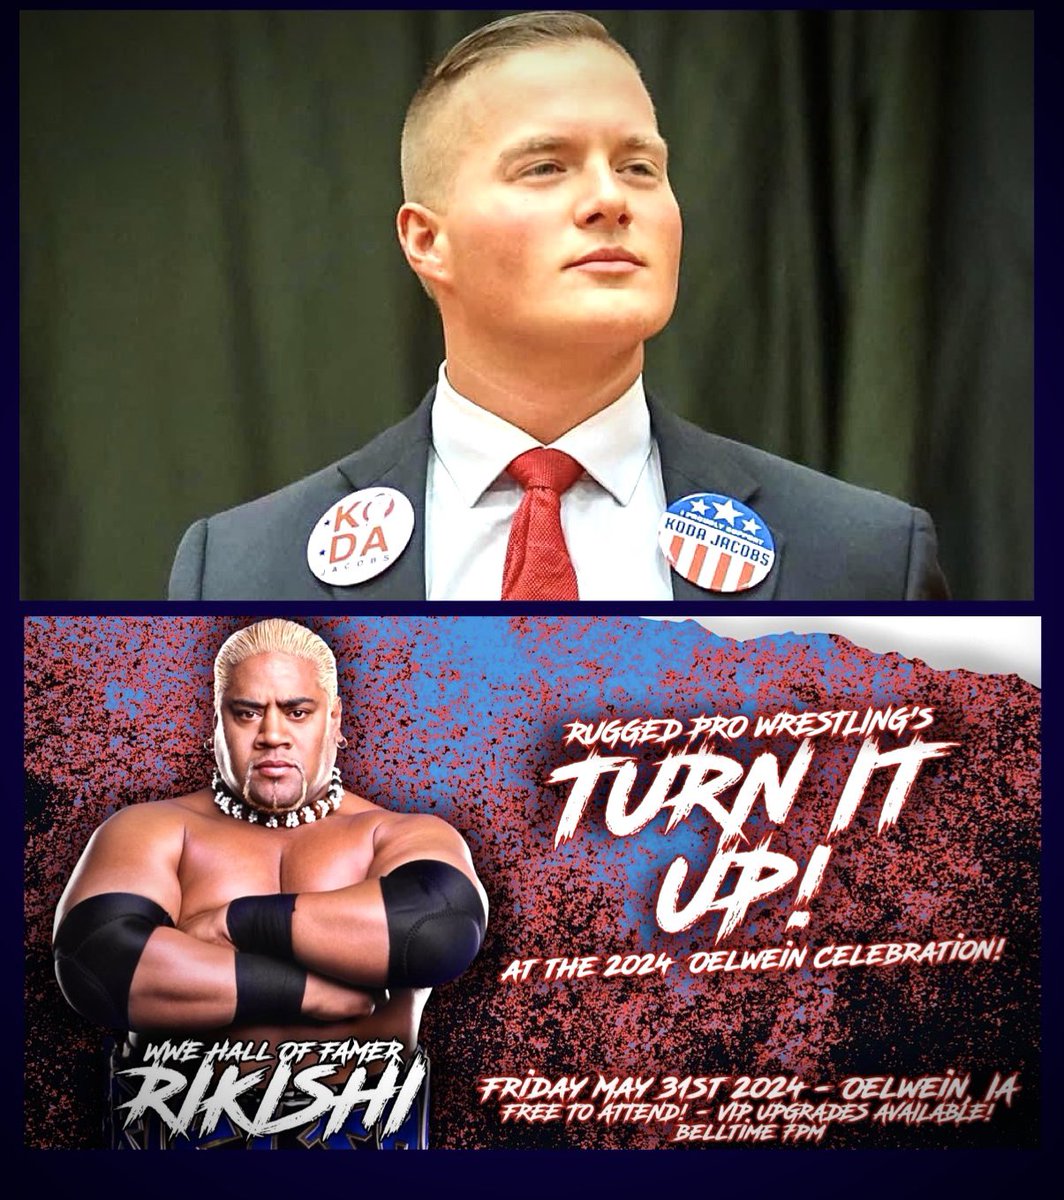 Koda Jacobs returns to #RUGGEDpro 🗓️FRIDAY, MAY 31 🗓️, as @RUGGEDwrestling & Oelwein Celebrations Inc. present #TurnItUp 📍 OELWEIN, IA 💥SPECIAL GUEST💥 #WWE #HoF’er @TheREALRIKISHI ‼️FREE ADMISSION‼️ 🎟PREMIUM TICKETS & MEET & GREET⬇️ checkout.square.site/merchant/MLP9Q…